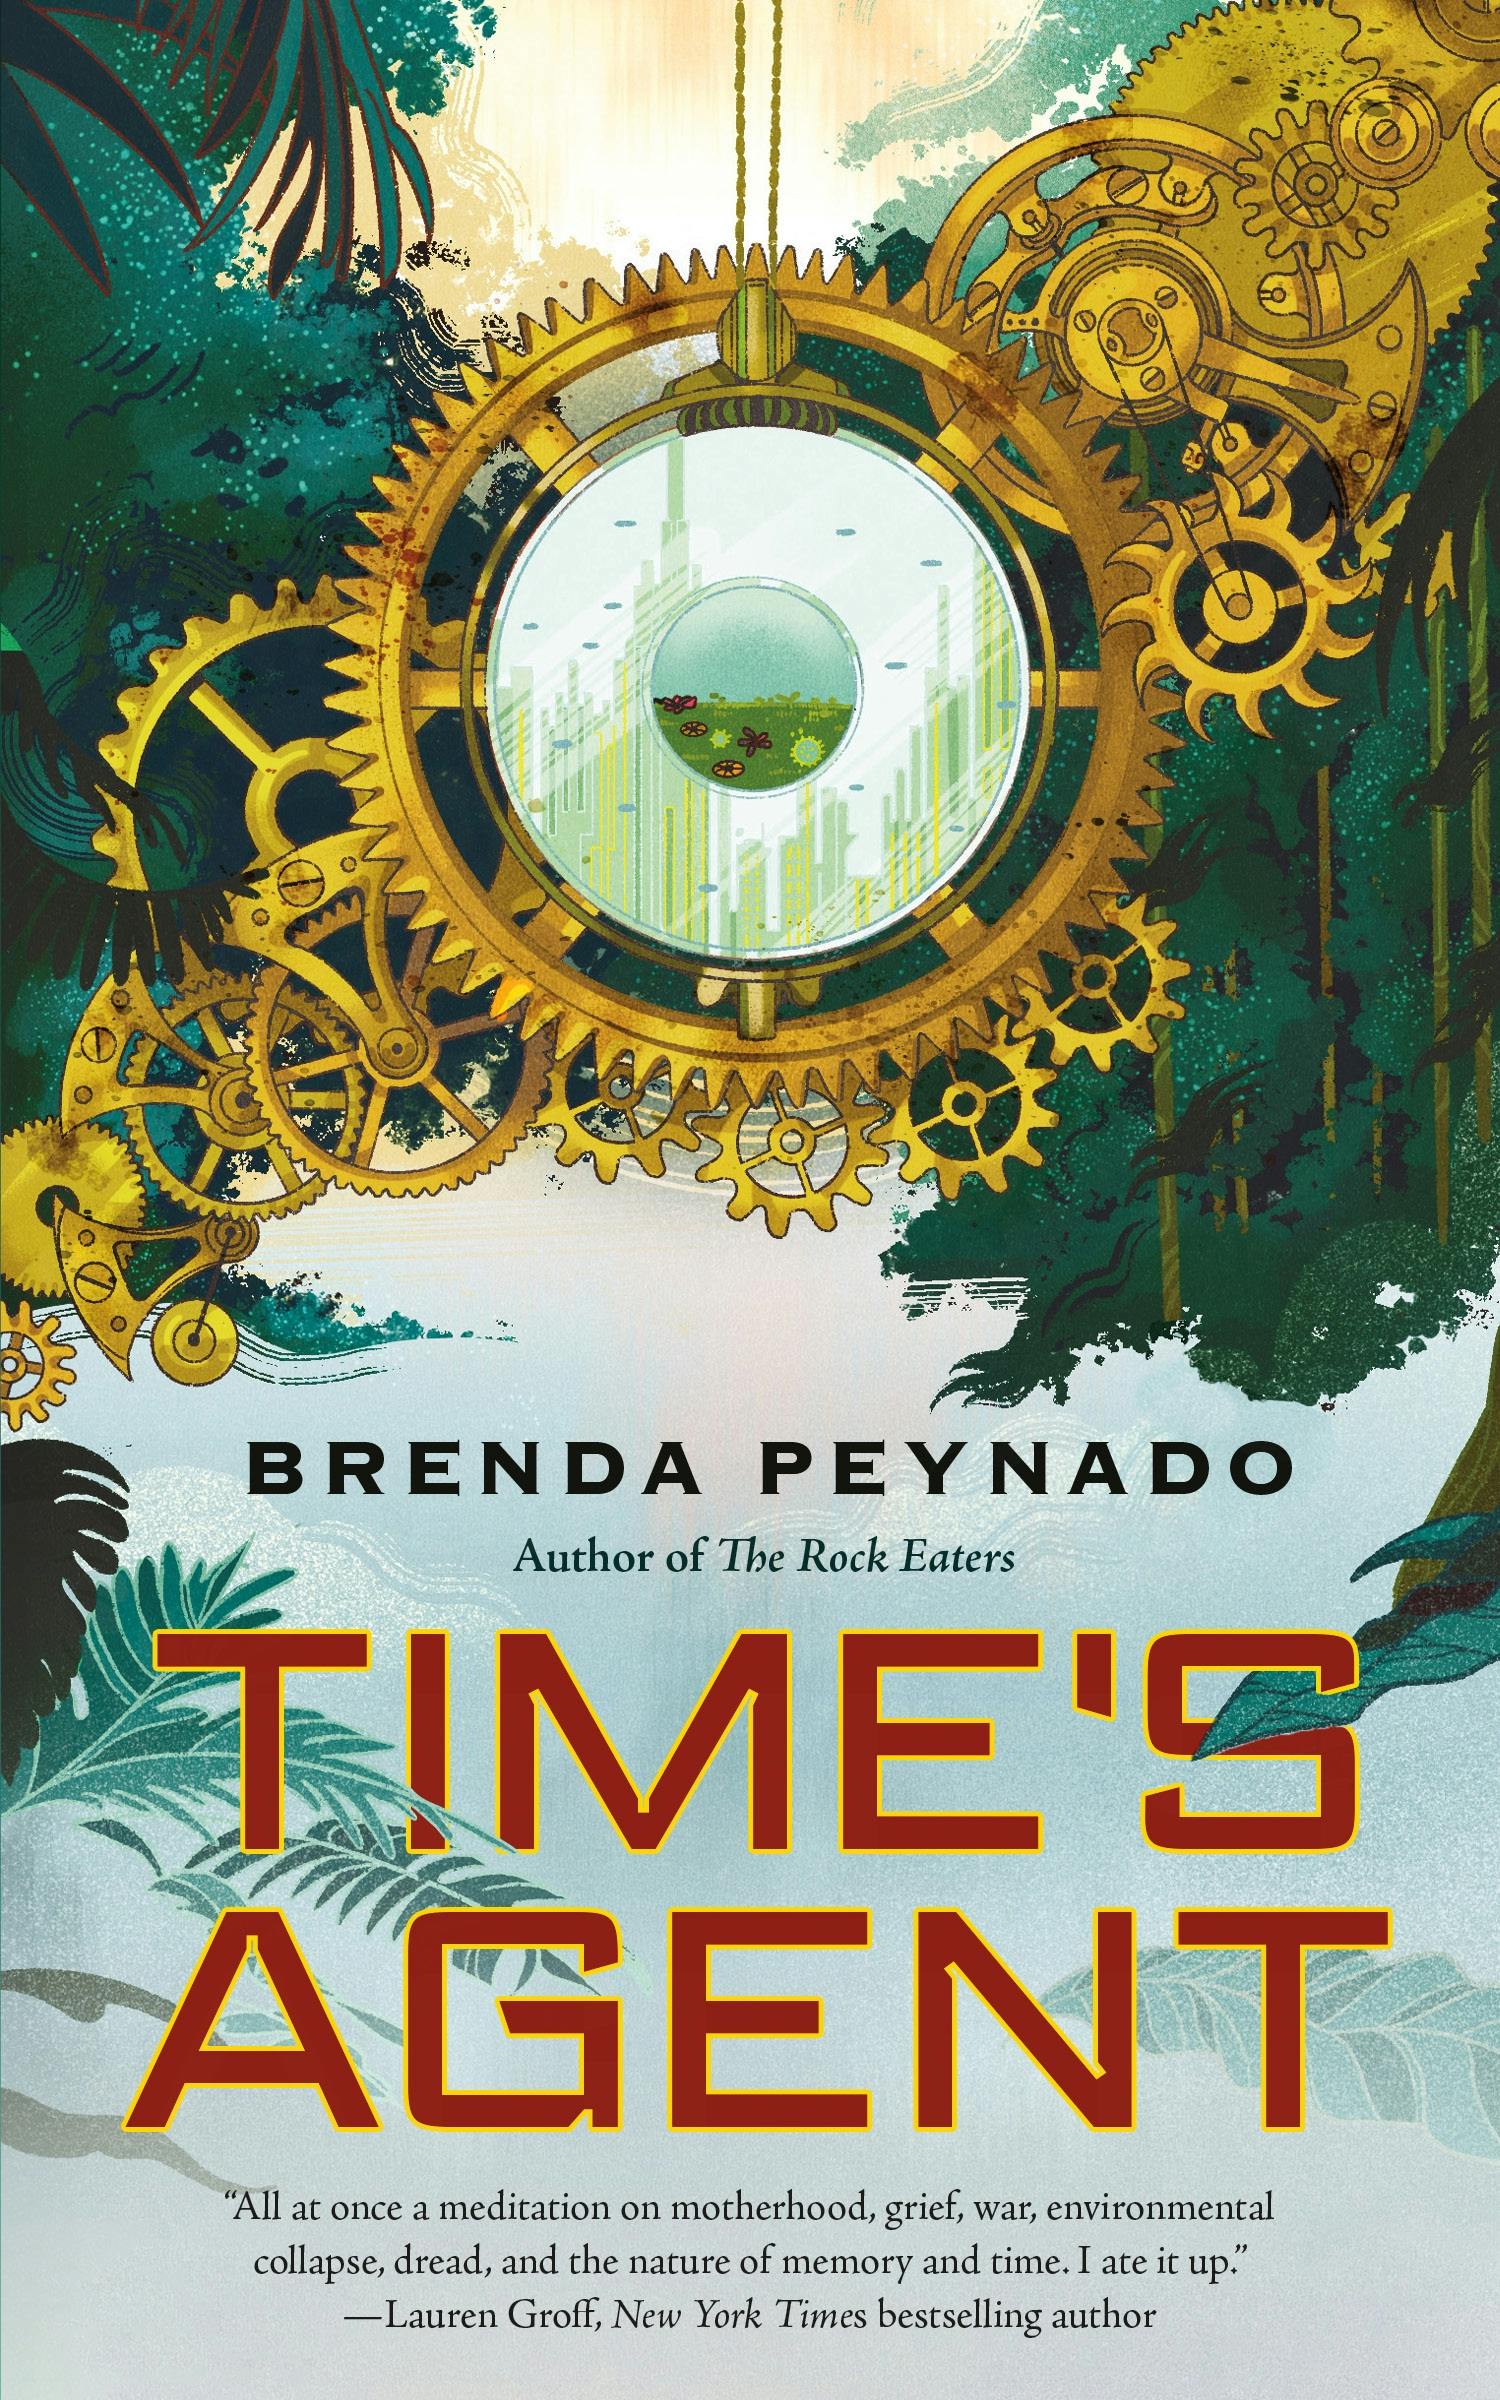 Cover for the book titled as: Time's Agent